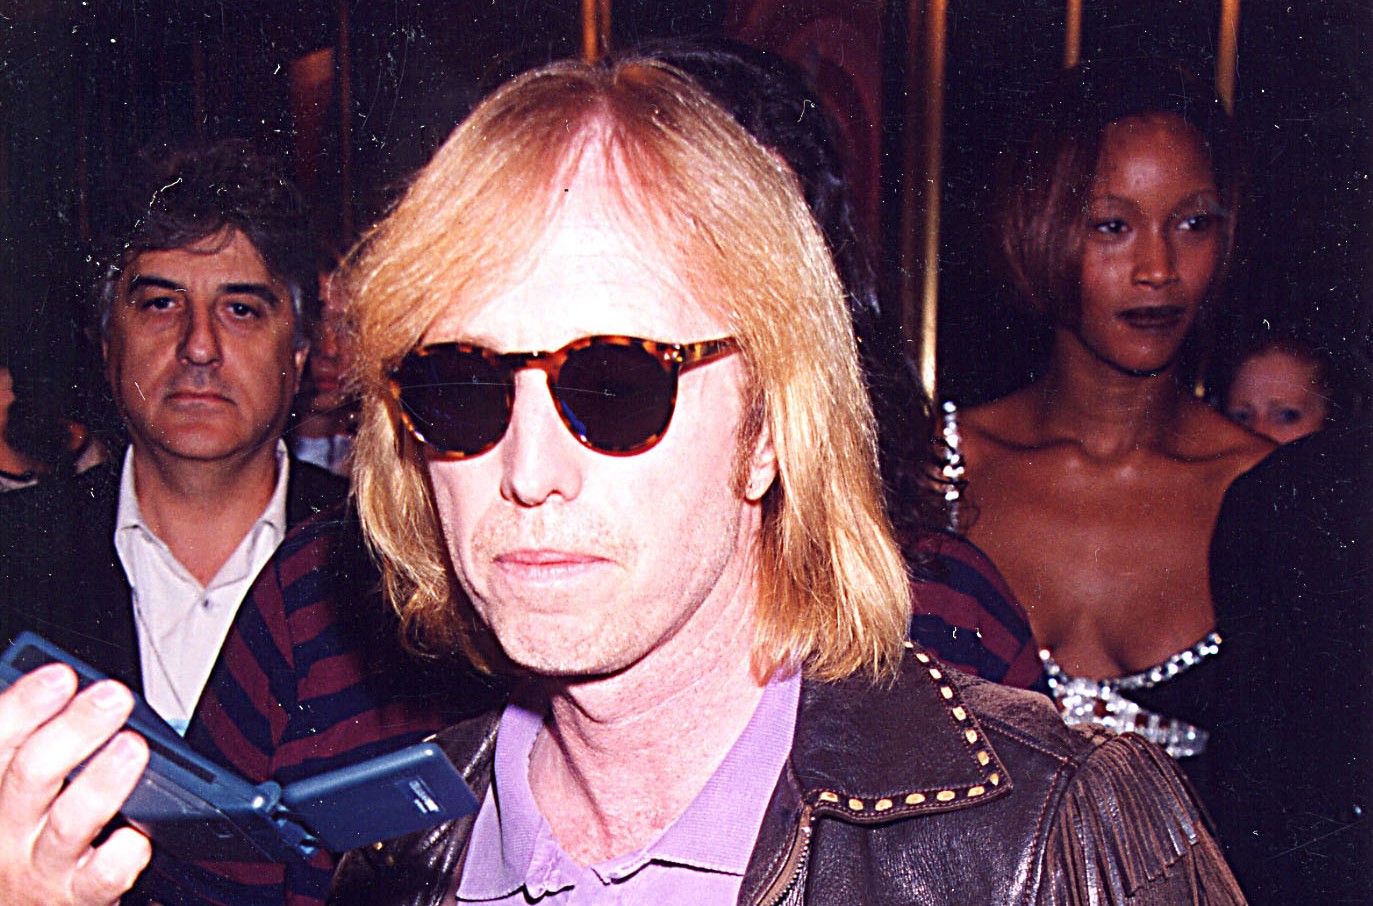 Tom Petty wears sunglasses and a leather jacket at the 1995 MTV Video Music Awards.